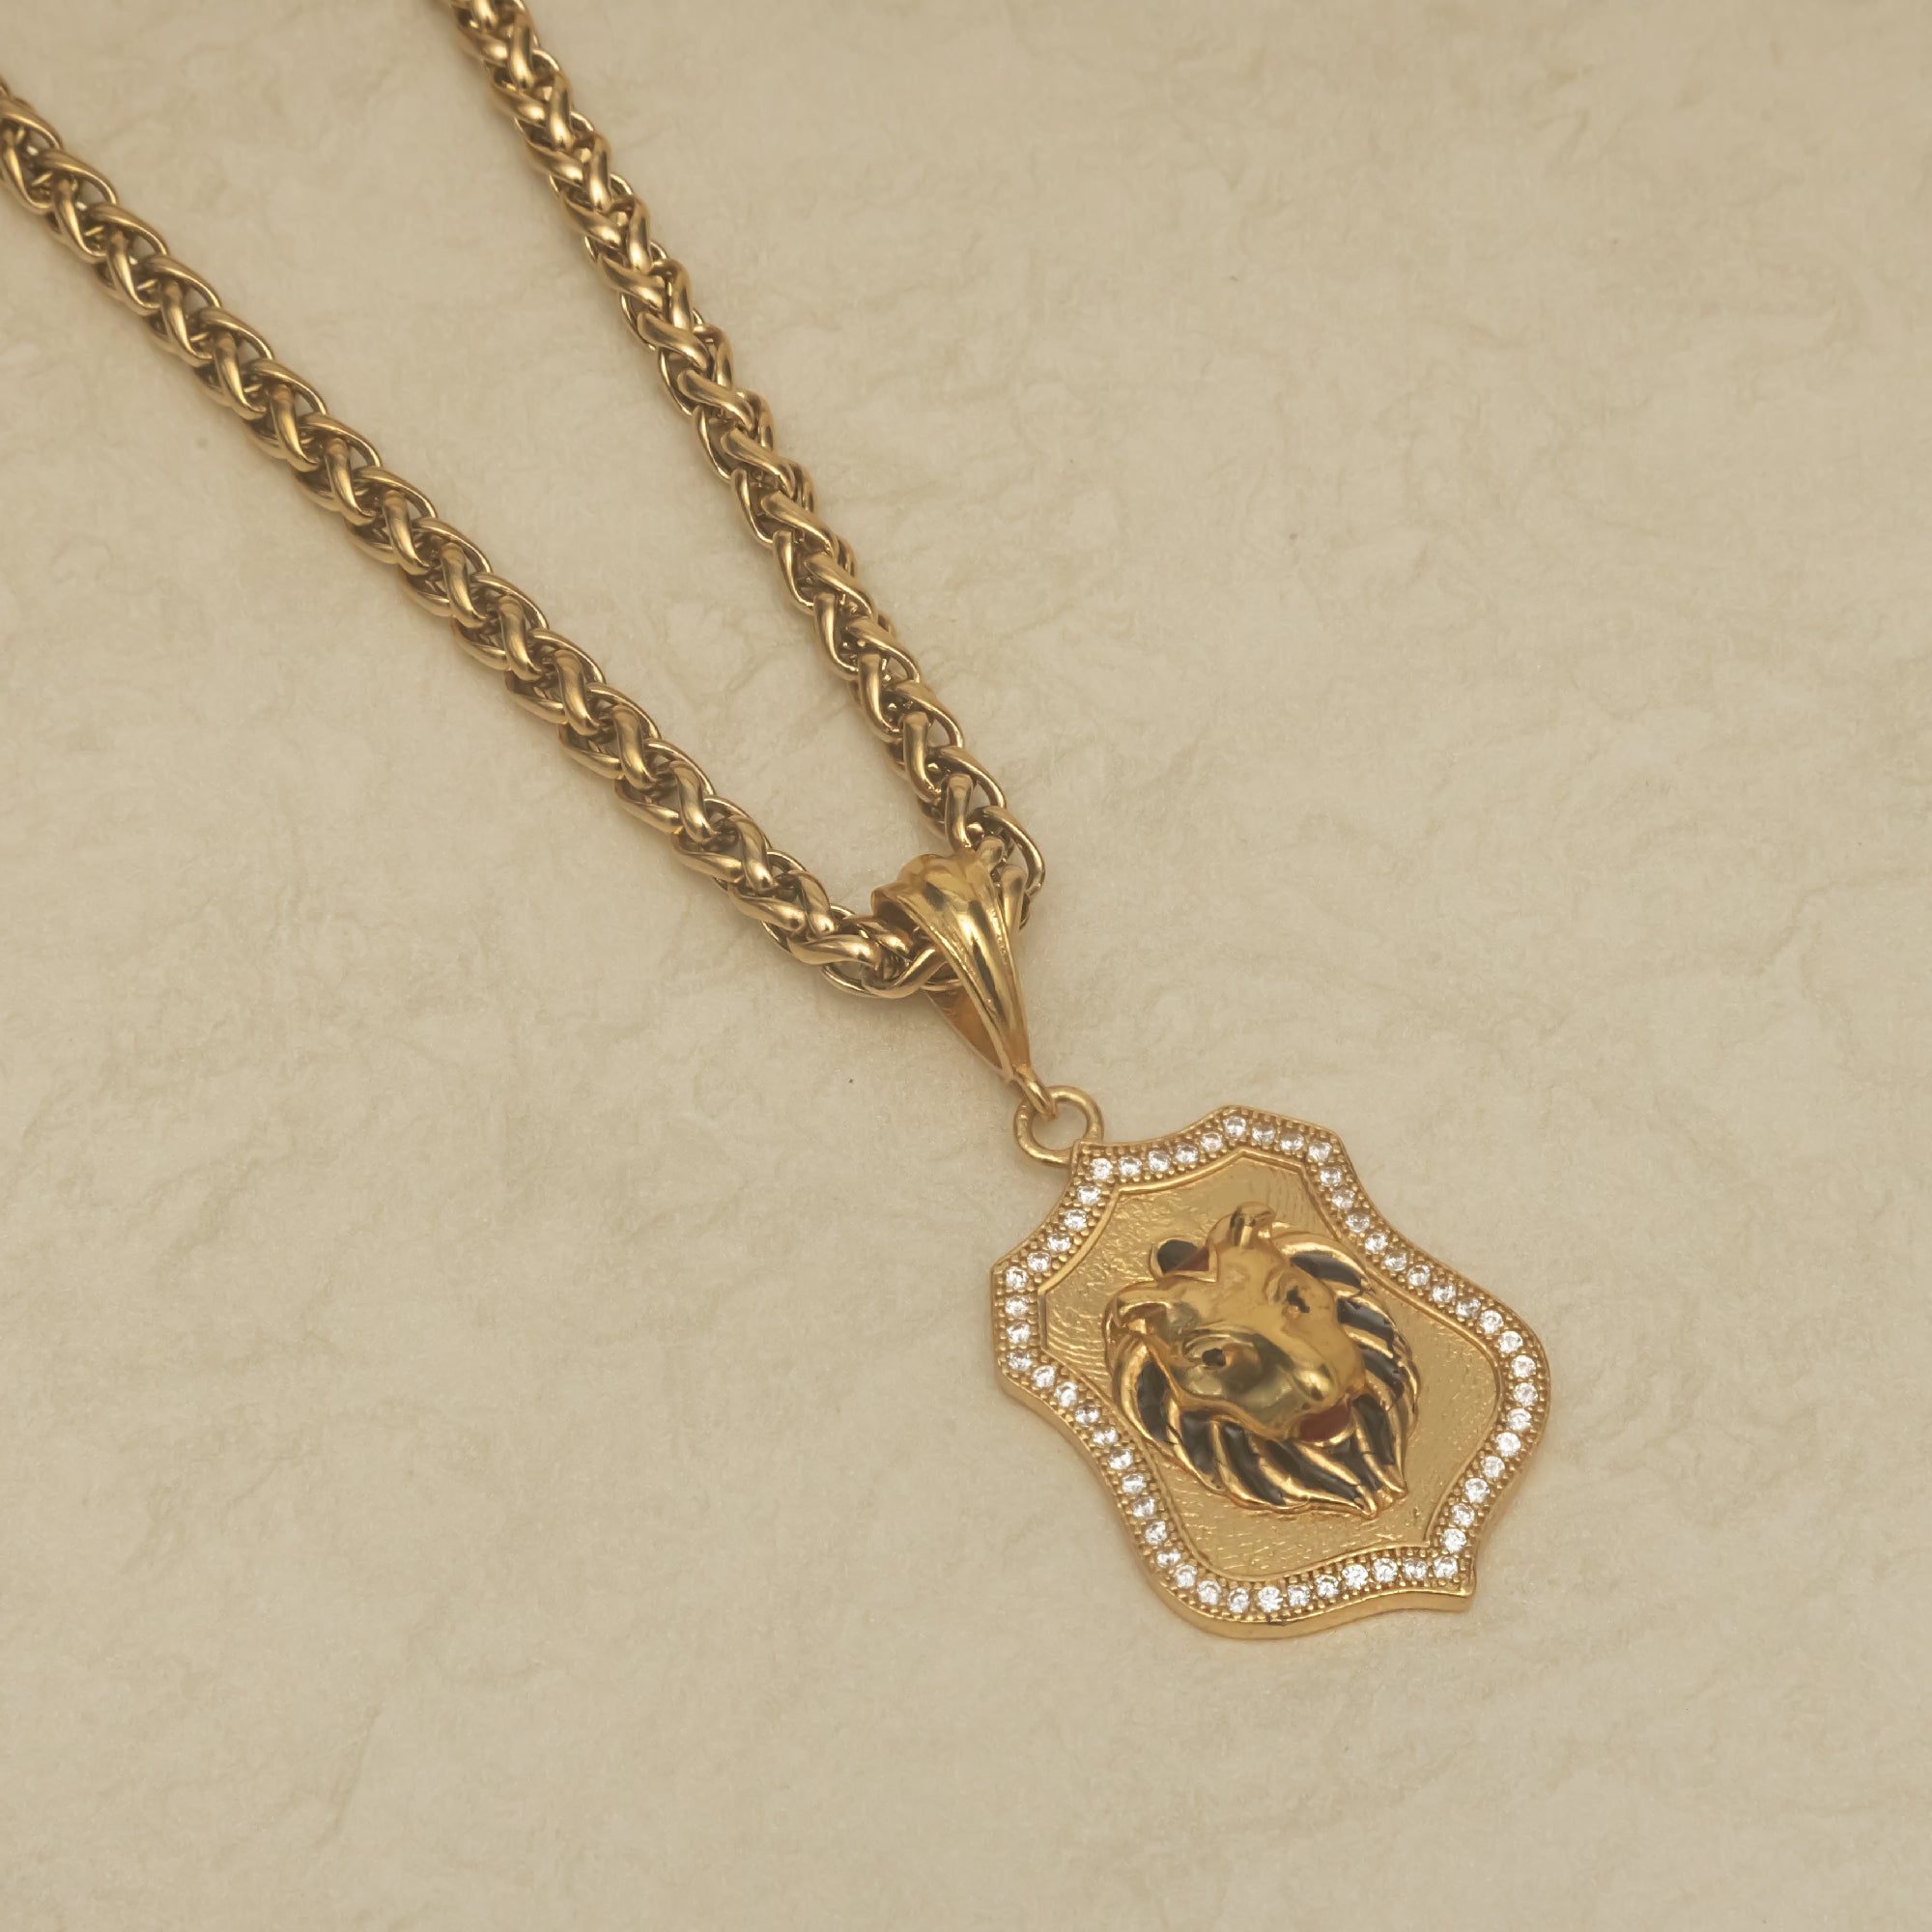 Portrait Of Tiger With Gold Chain Pendant